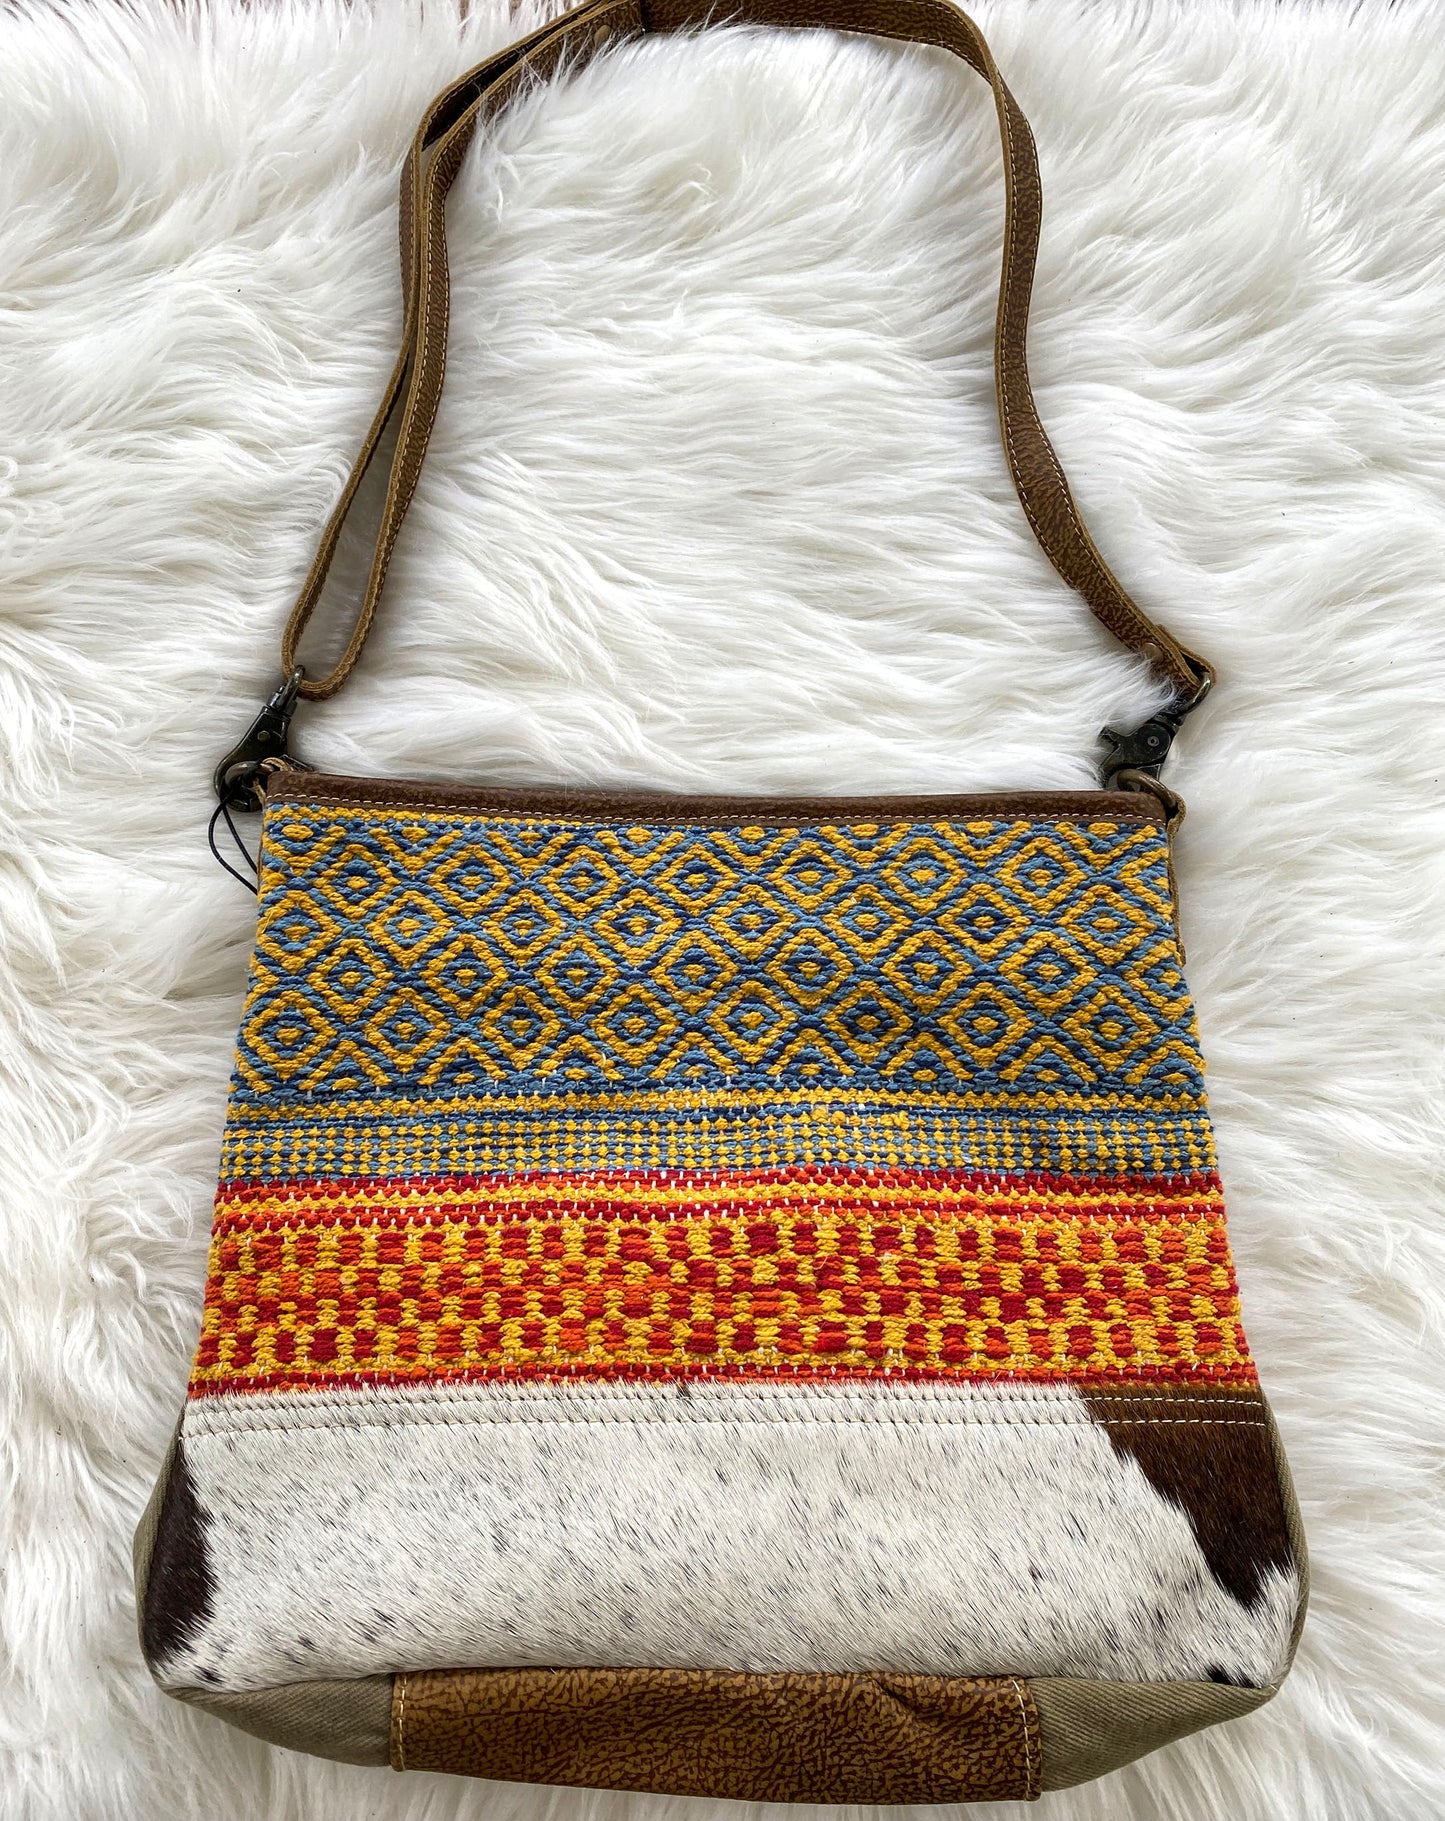 Tan Myra colorful leather and hair on cowhide shoulder bag with recycled colorful red and turquoise fabric